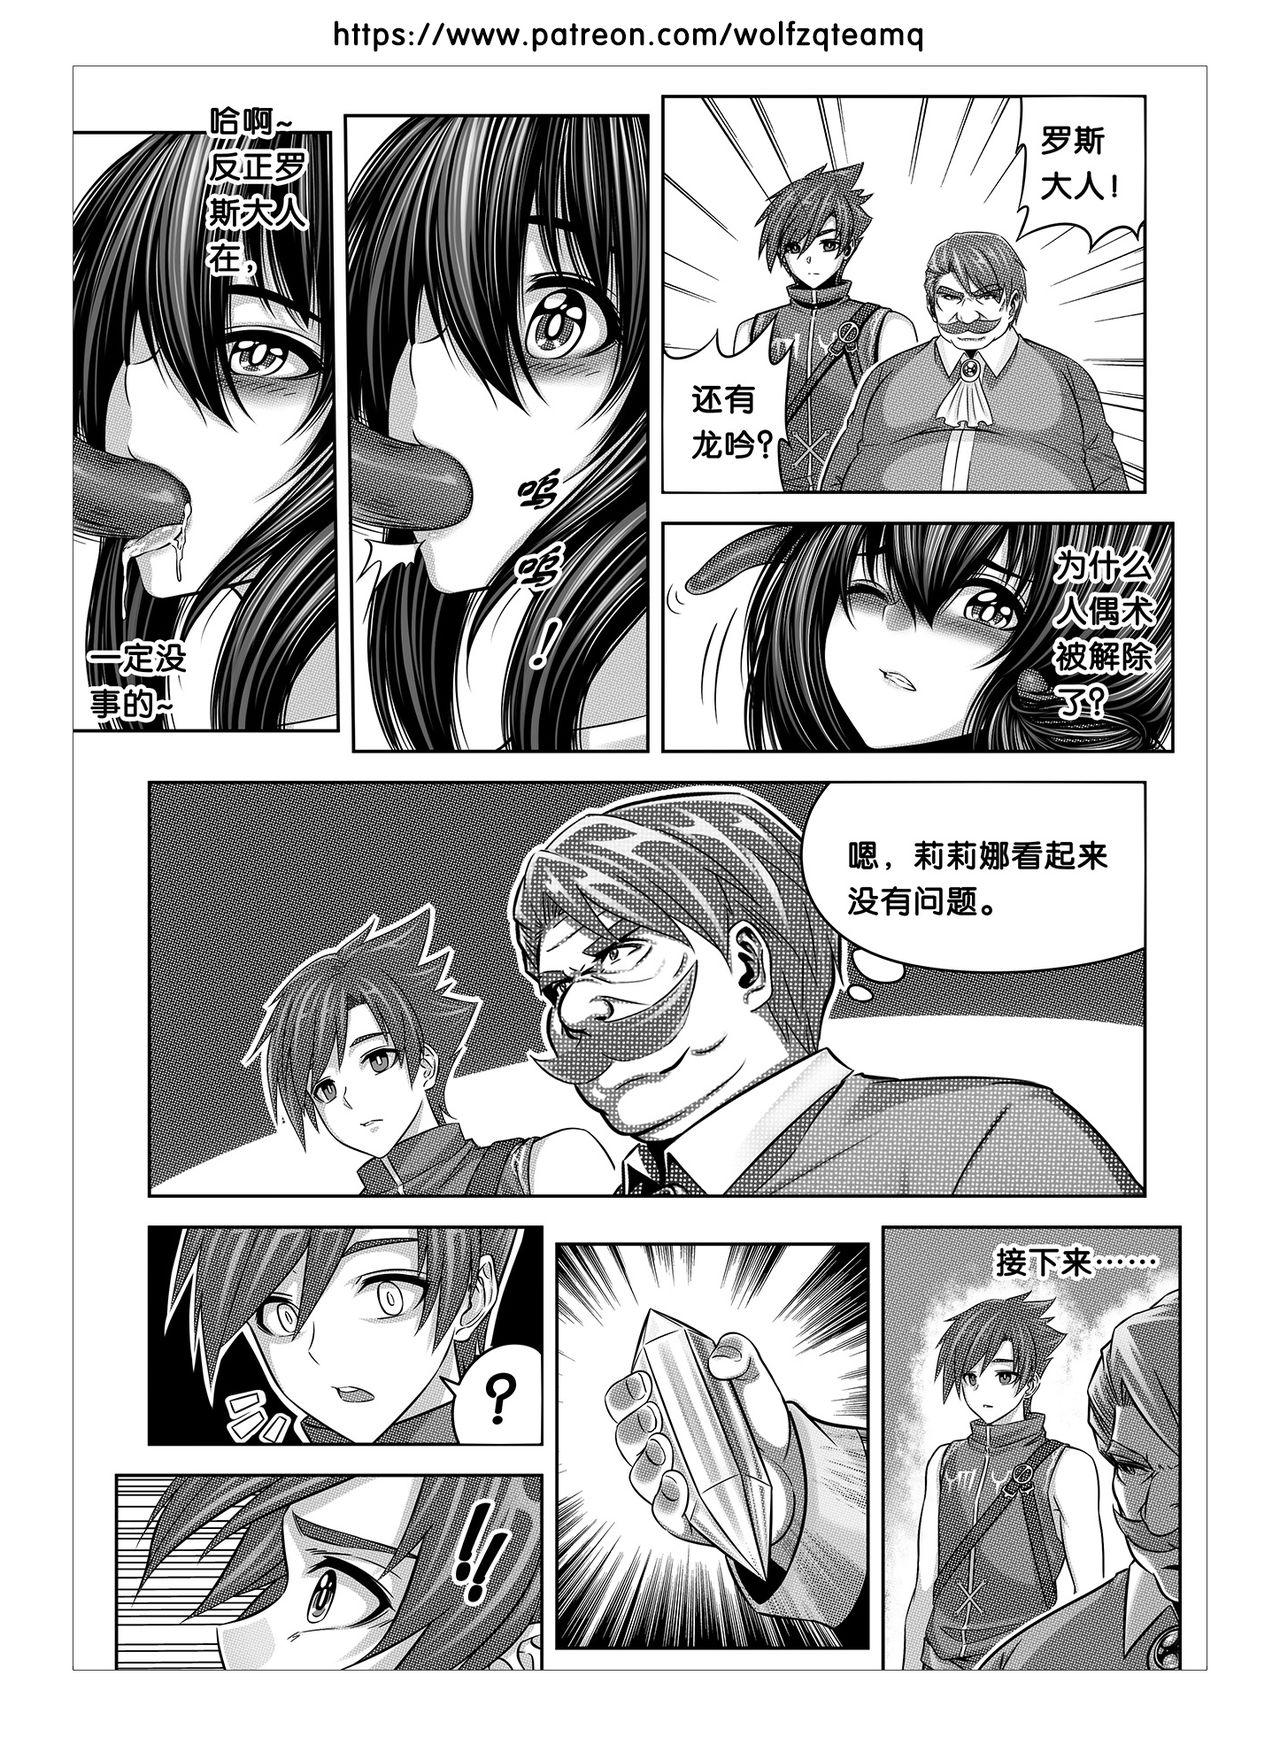 Euro Porn Bad End Of Cursed Armor College Line（诅咒铠甲学院线）Chinese Spread - Page 8